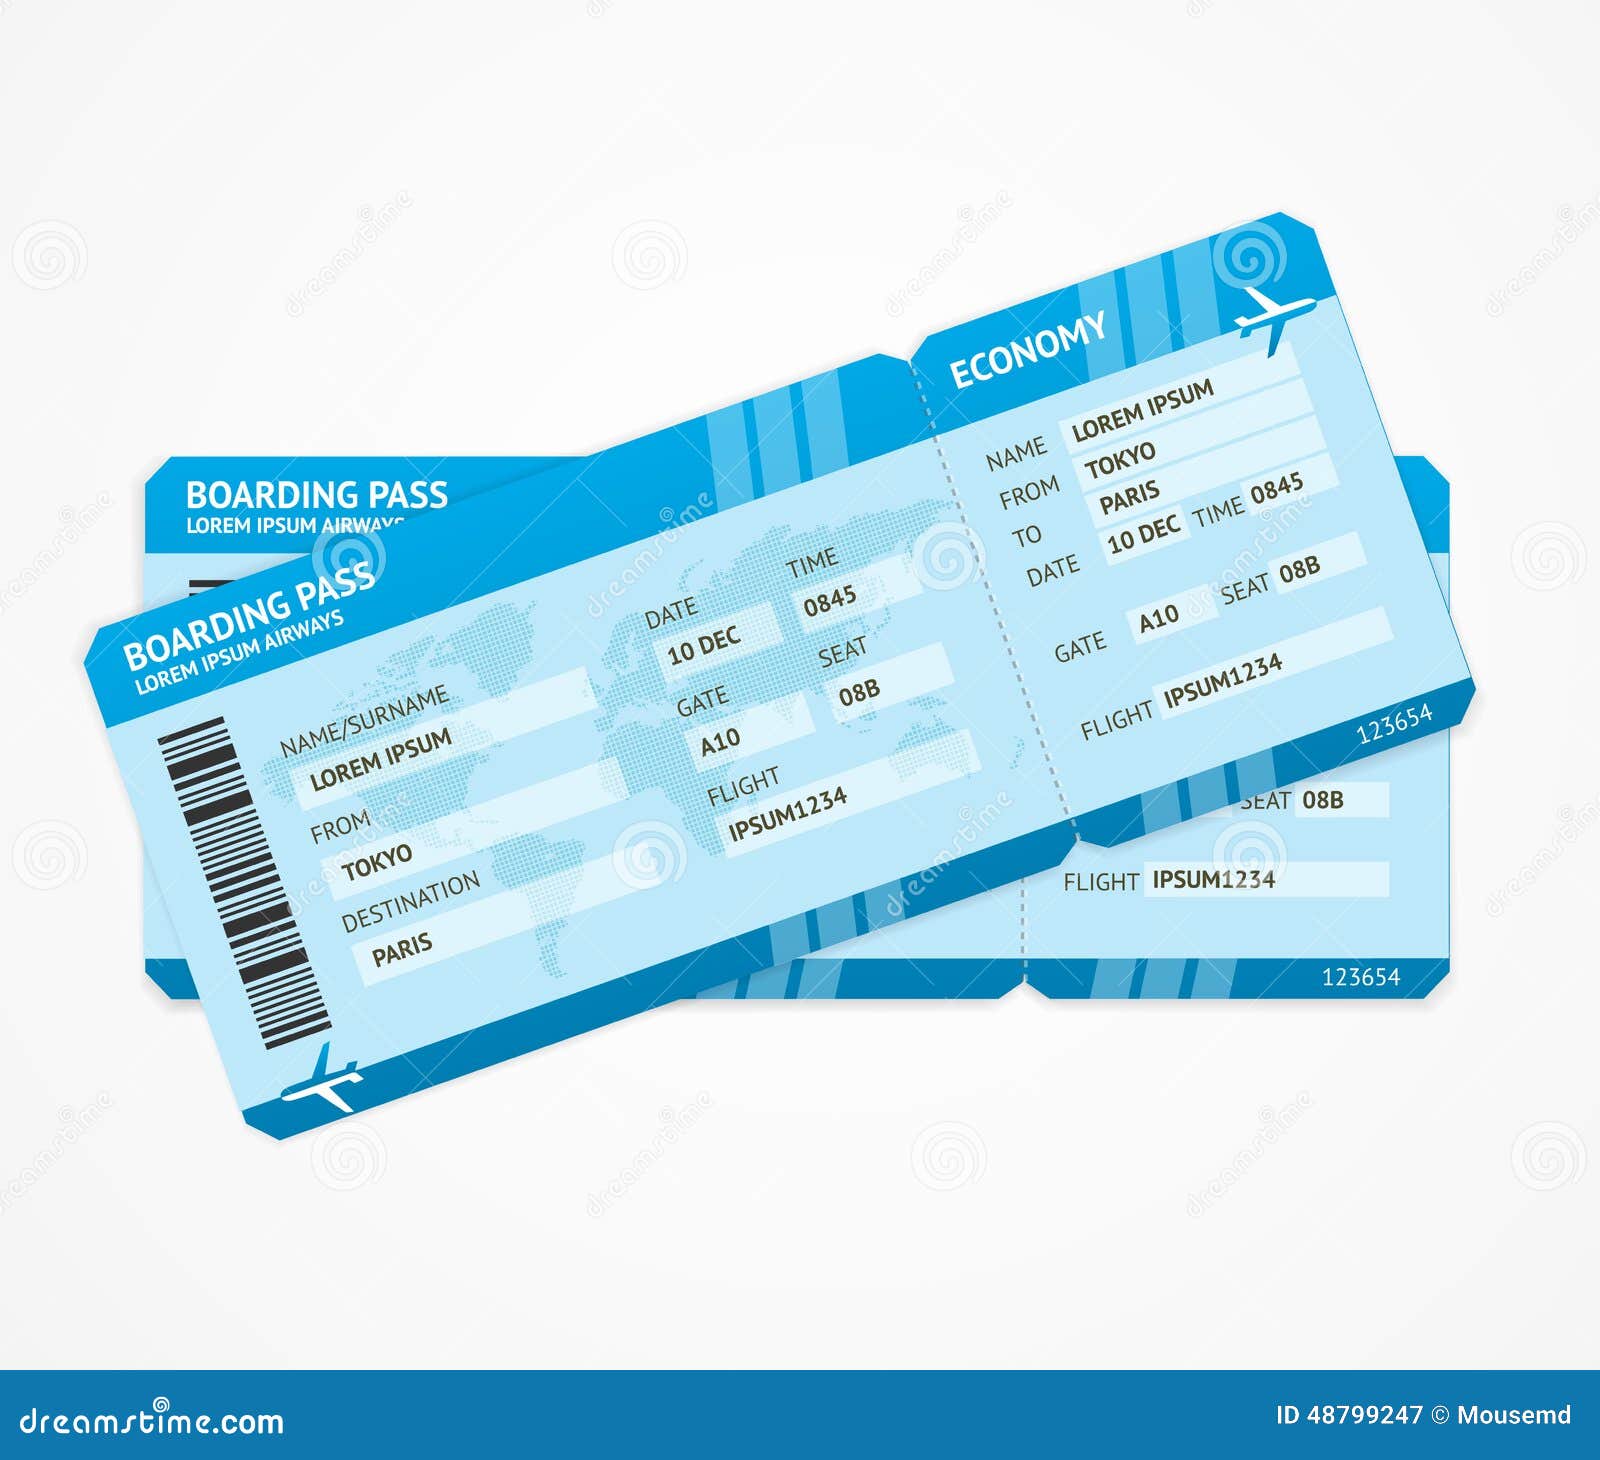 clipart airplane ticket - photo #10